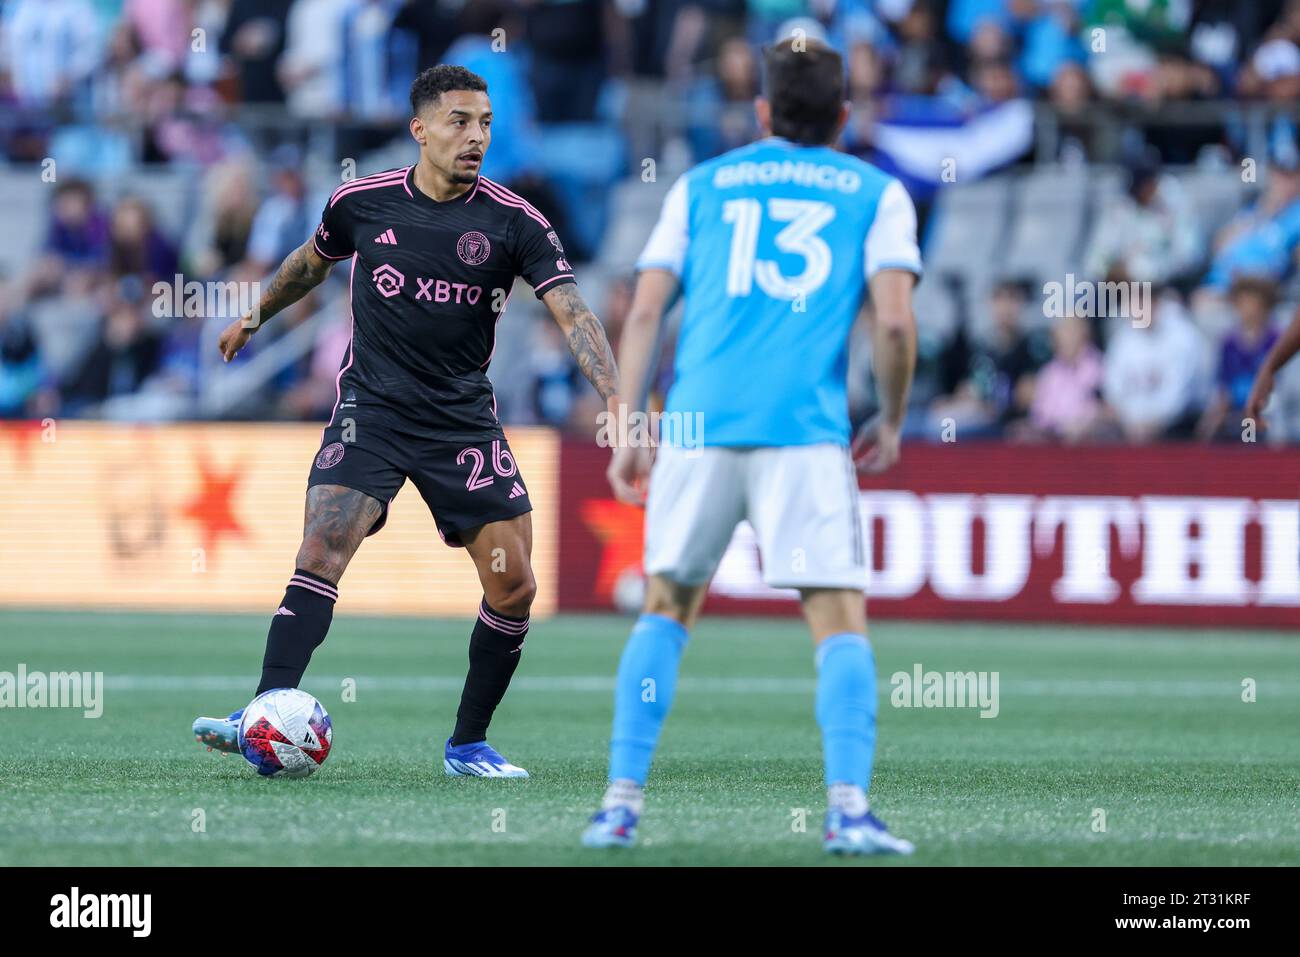 Charlotte, North Carolina, USA. 21st Oct, 2023. Inter Miami midfielder Gregore (26) looks to pass during the MLS soccer match between Inter Miami CF and Charlotte FC at Bank of America Stadium in Charlotte, North Carolina. Greg Atkins/CSM/Alamy Live News Stock Photo